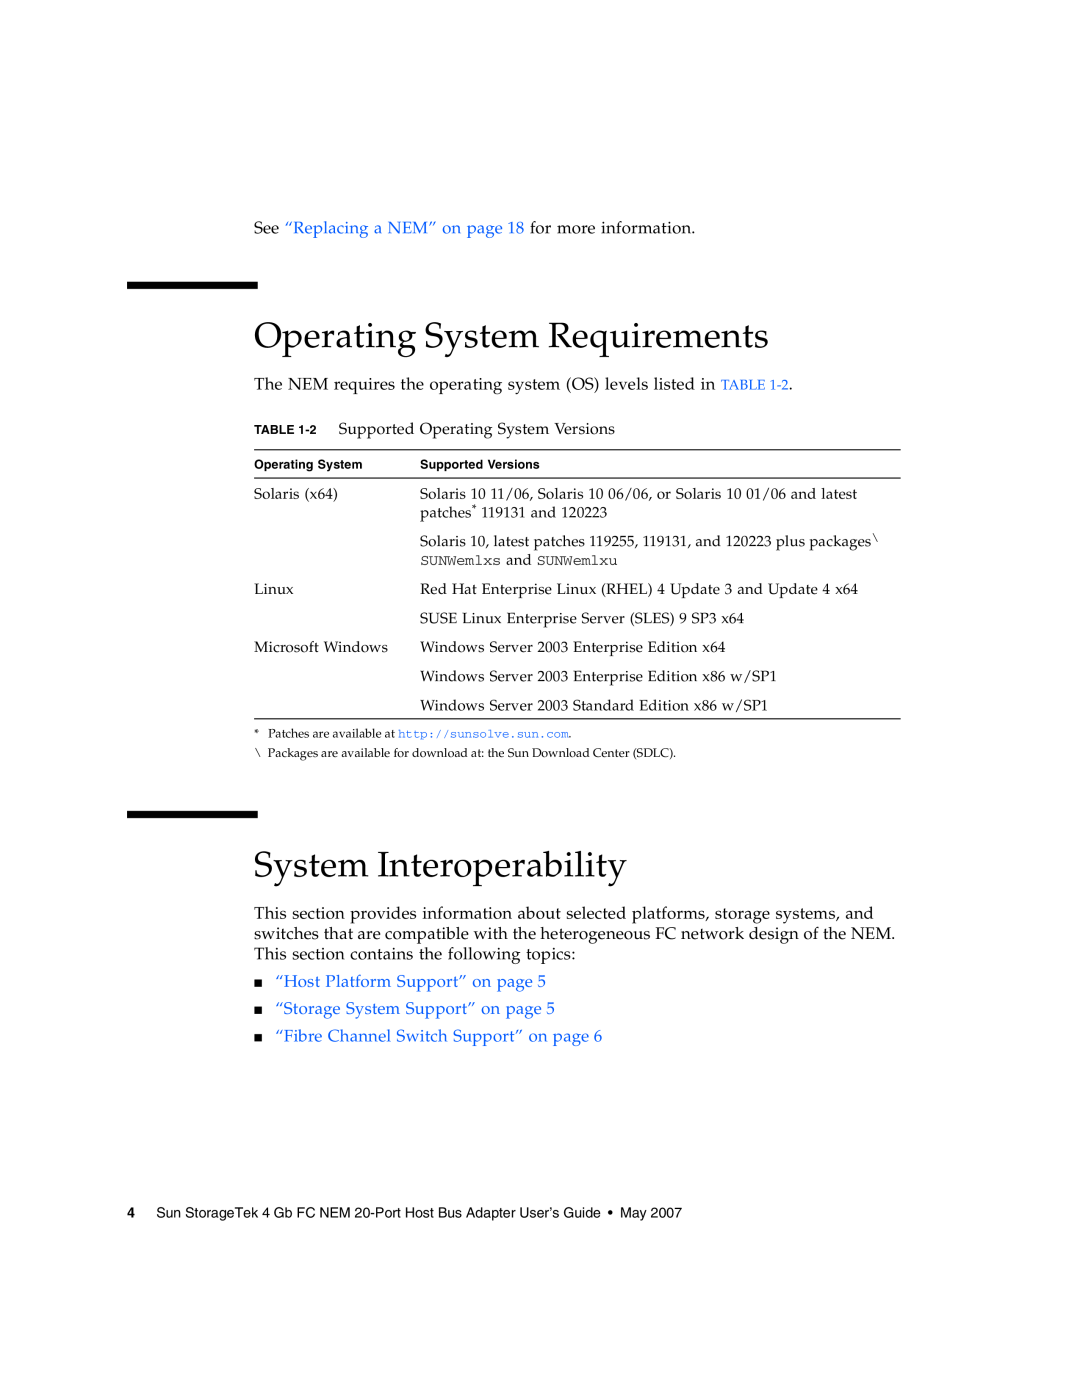 Sun Microsystems 2.0 manual Operating System Requirements, System Interoperability, “Fibre Channel Switch Support” on page 